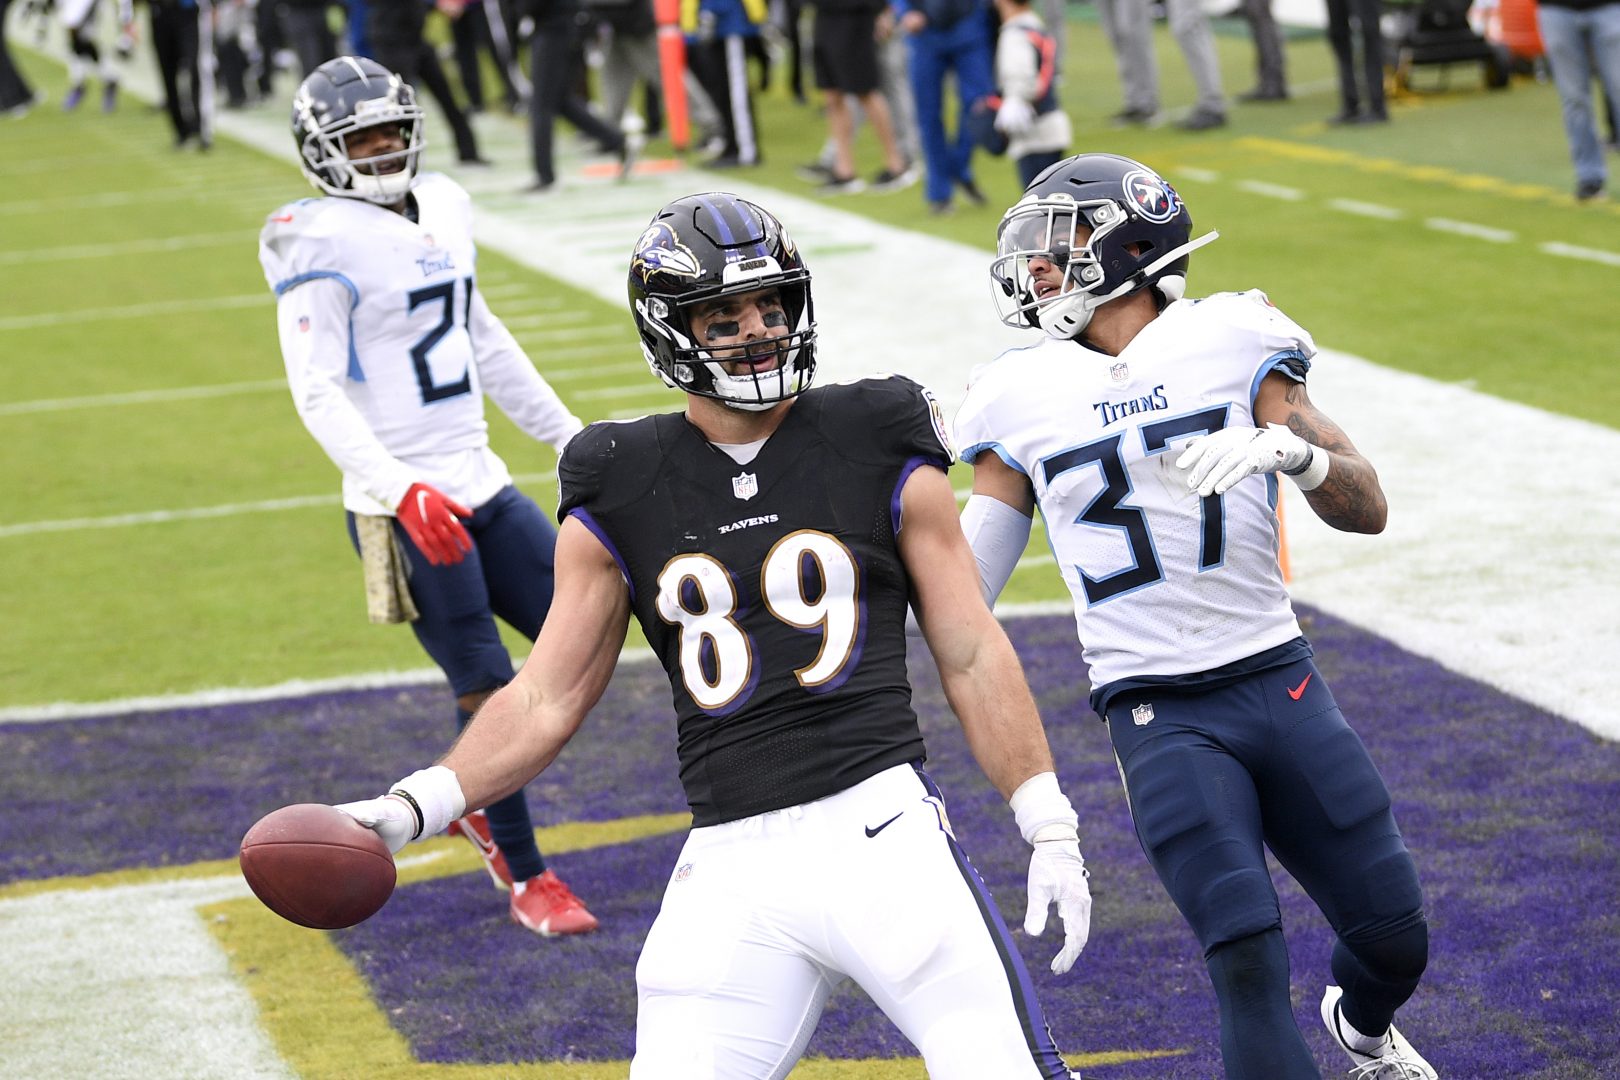 Baltimore Ravens tight end Mark Andrews (89) reacts after scoring on a touchdown pass from quarterback Lamar Jackson, not visible, during the second half of an NFL football game against the Tennessee Titans, Sunday, Nov. 22, 2020, in Baltimore. Titans' Amani Hooker (37) and Malcolm Butler (21) look on. (AP Photo/Nick Wass)